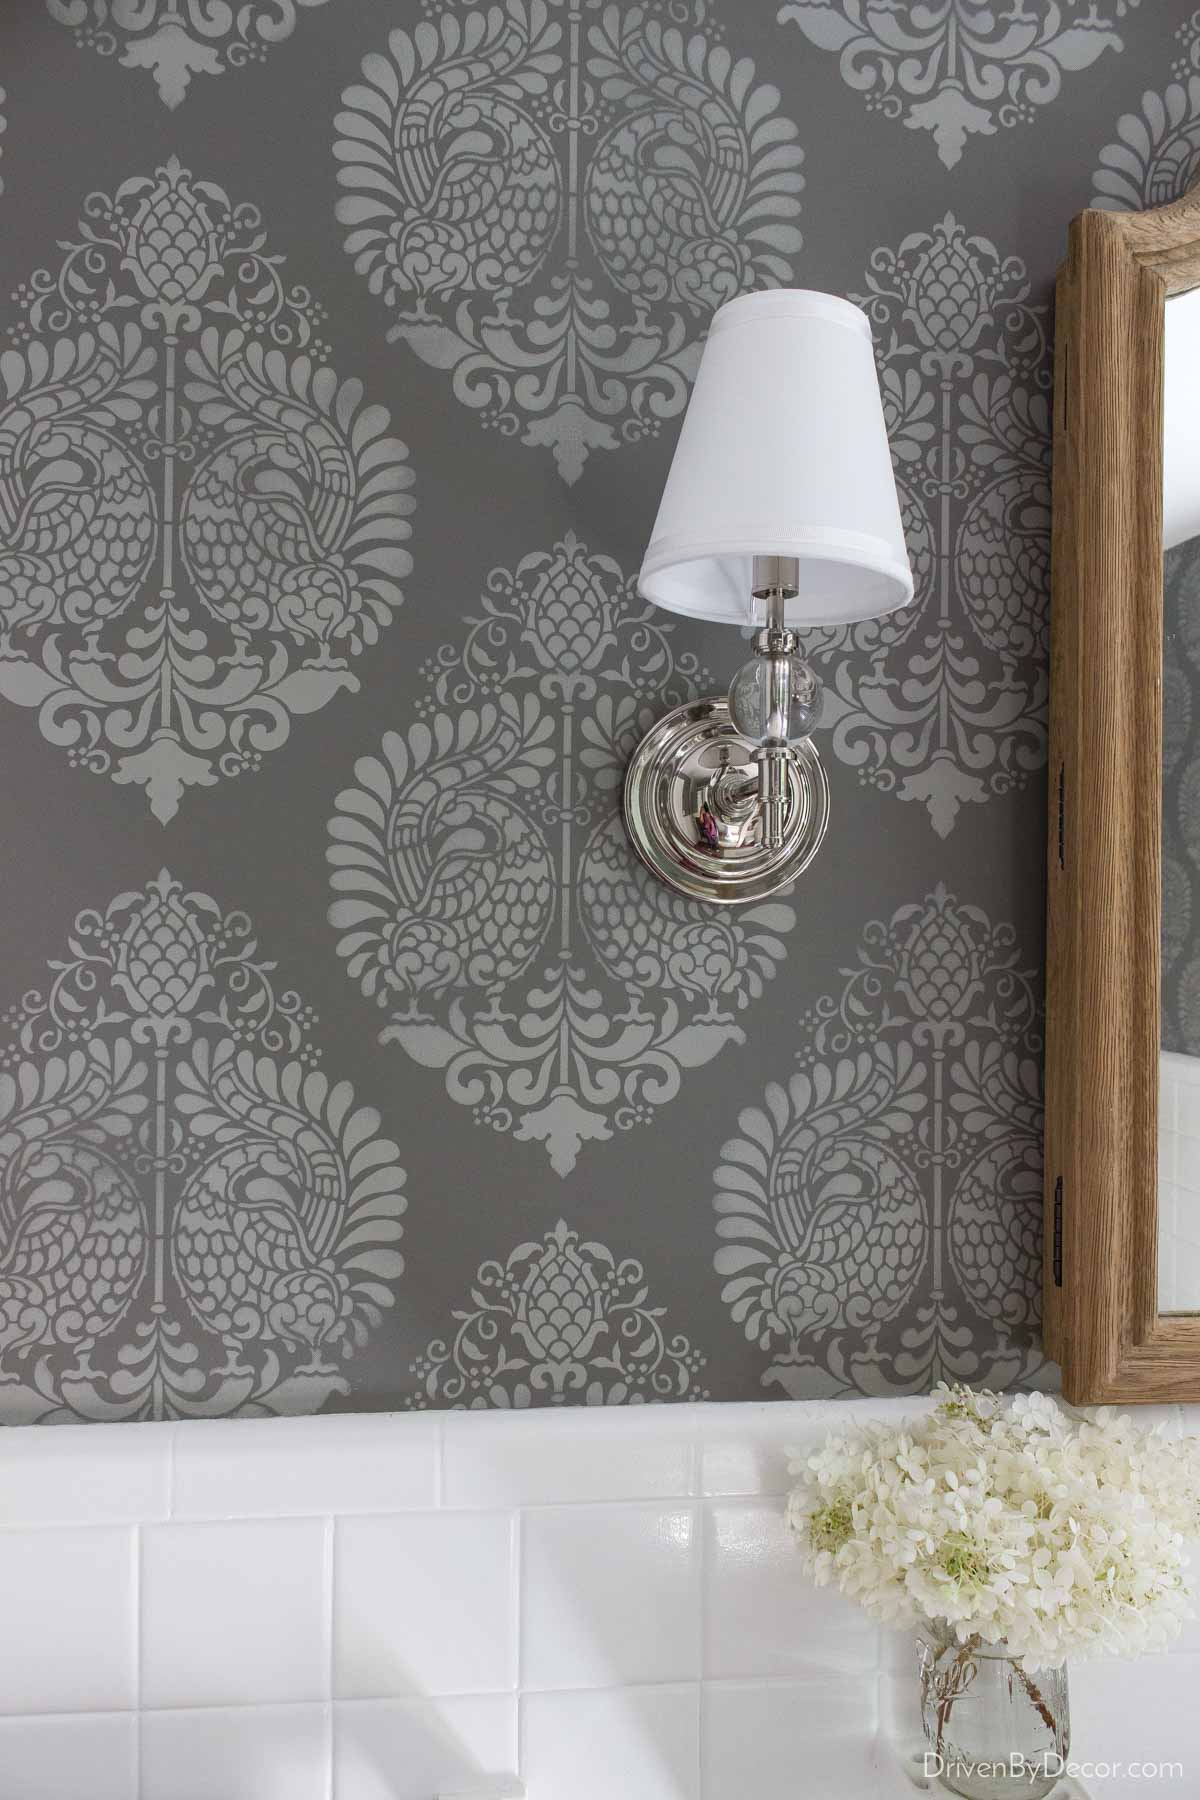 Finished stenciled wall in bathroom